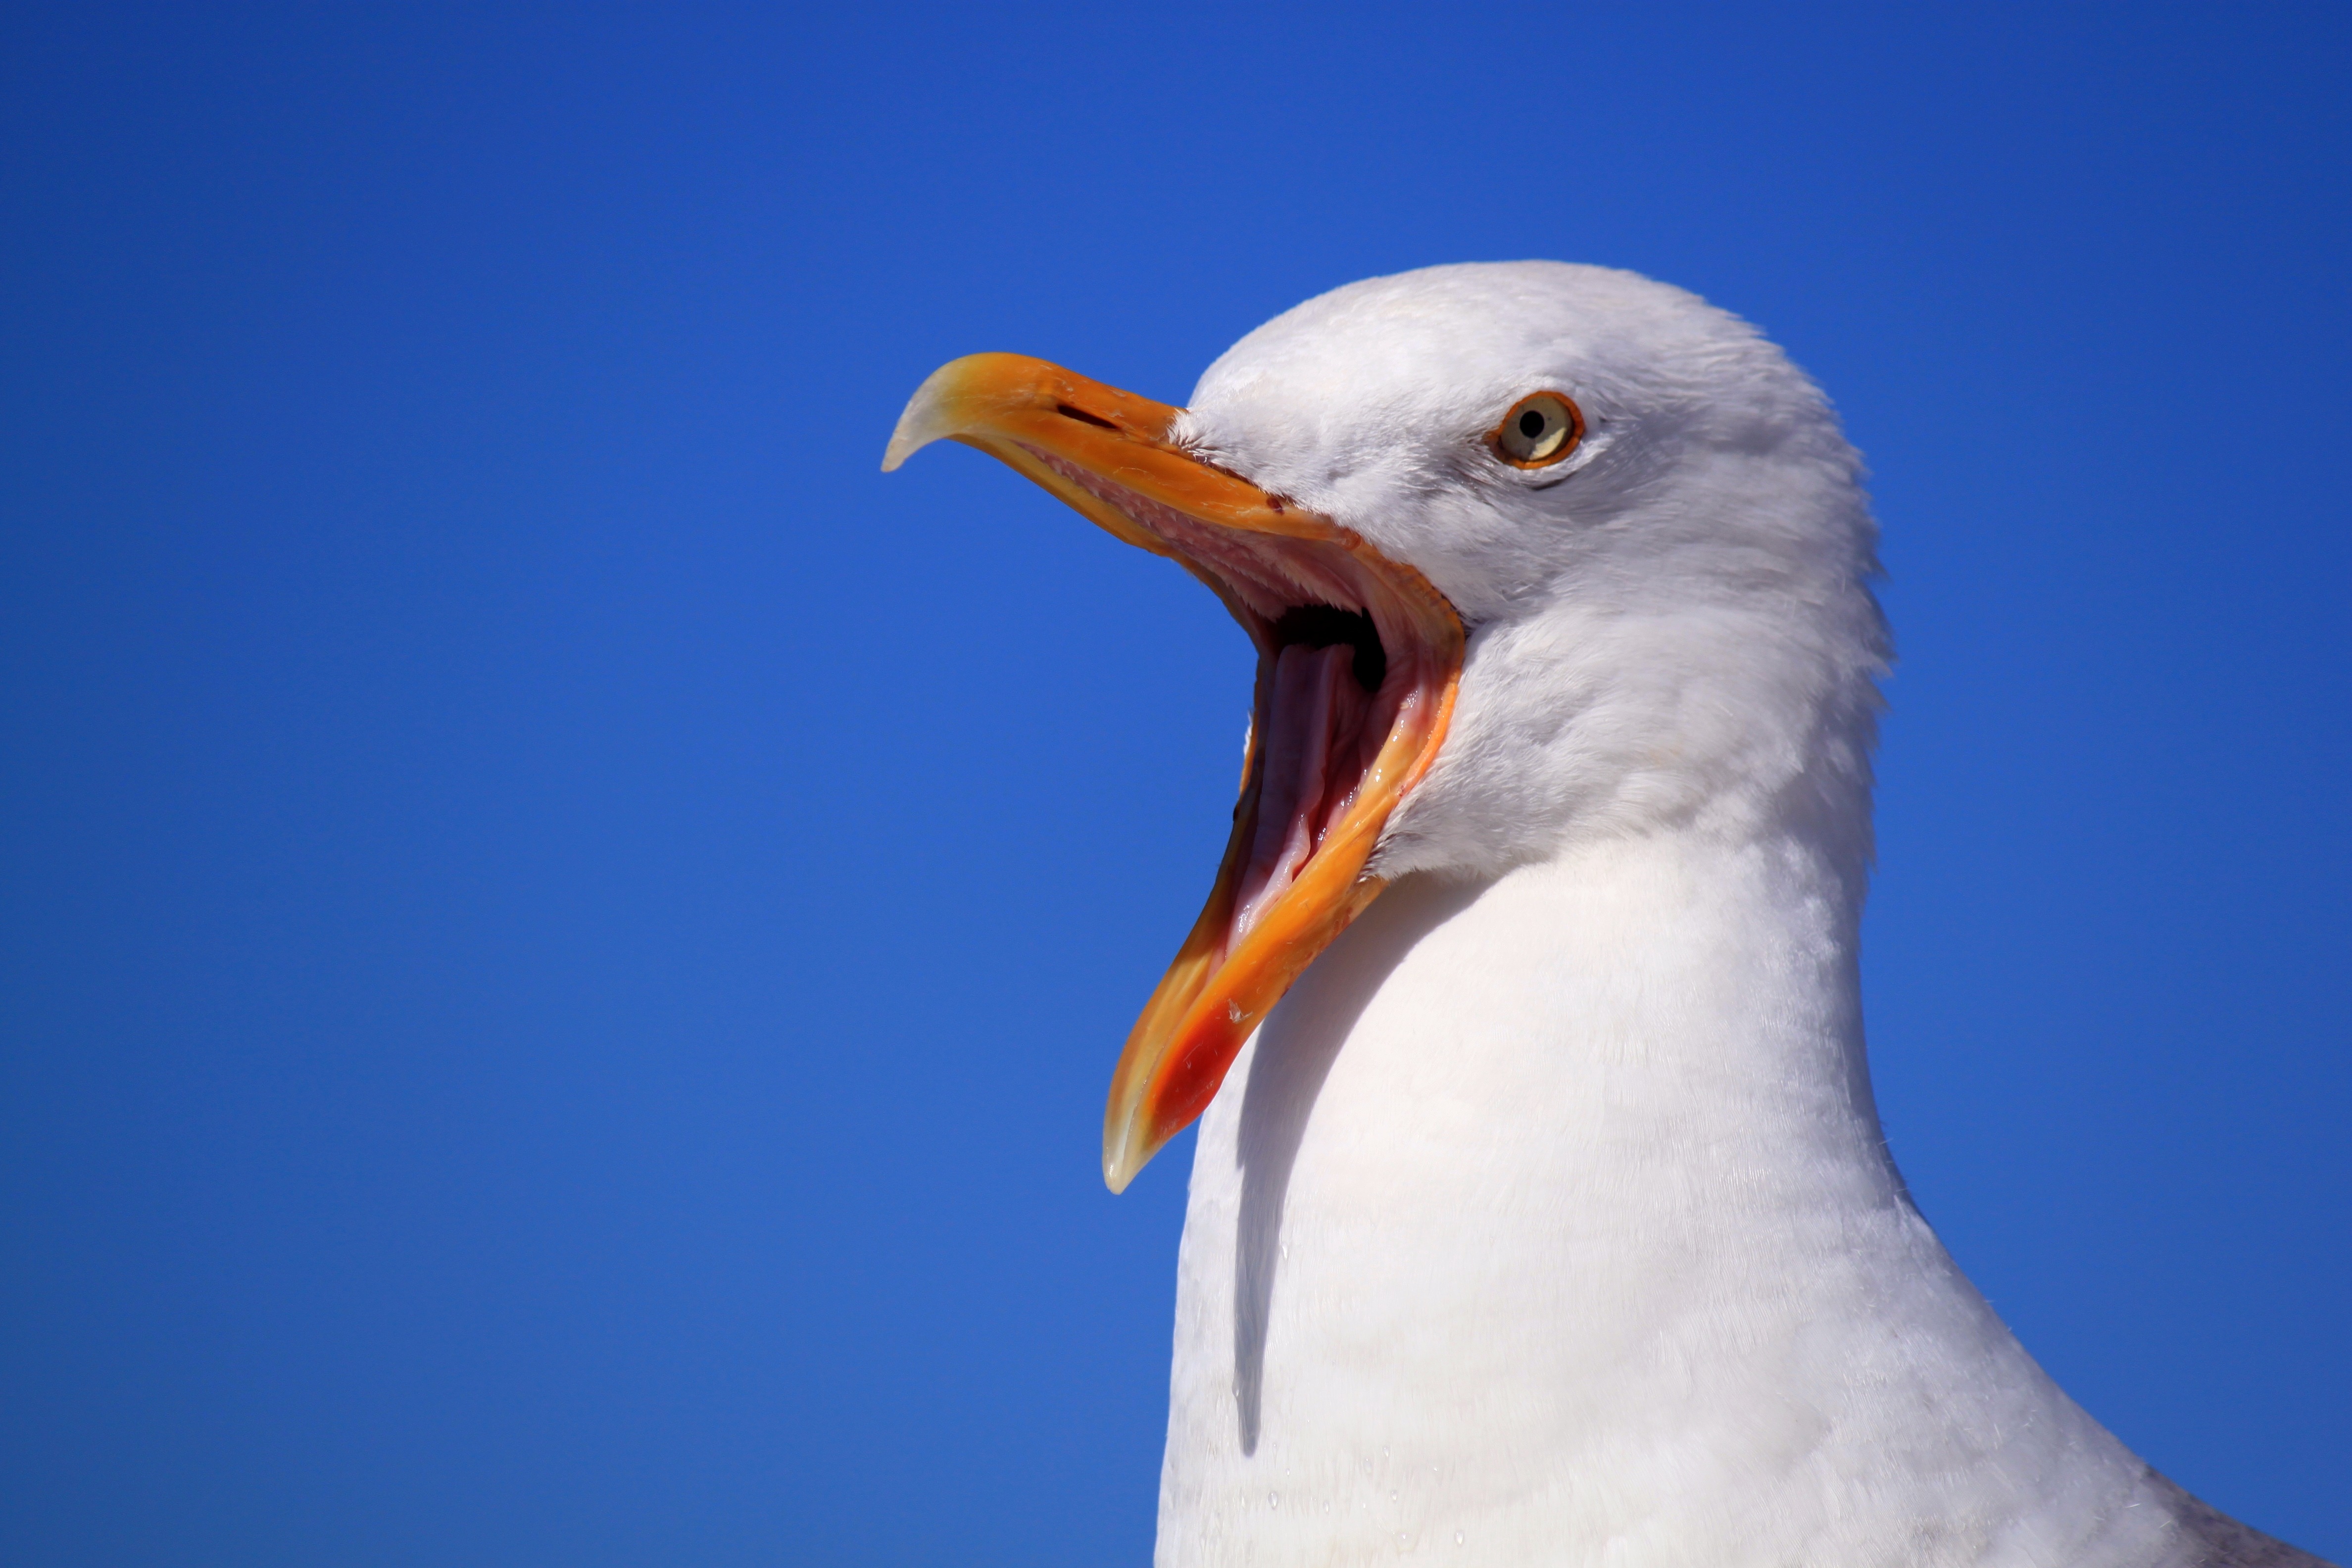 80722 Screensavers and Wallpapers Scream for phone. Download animals, bird, beak, gull, seagull, scream, cry pictures for free